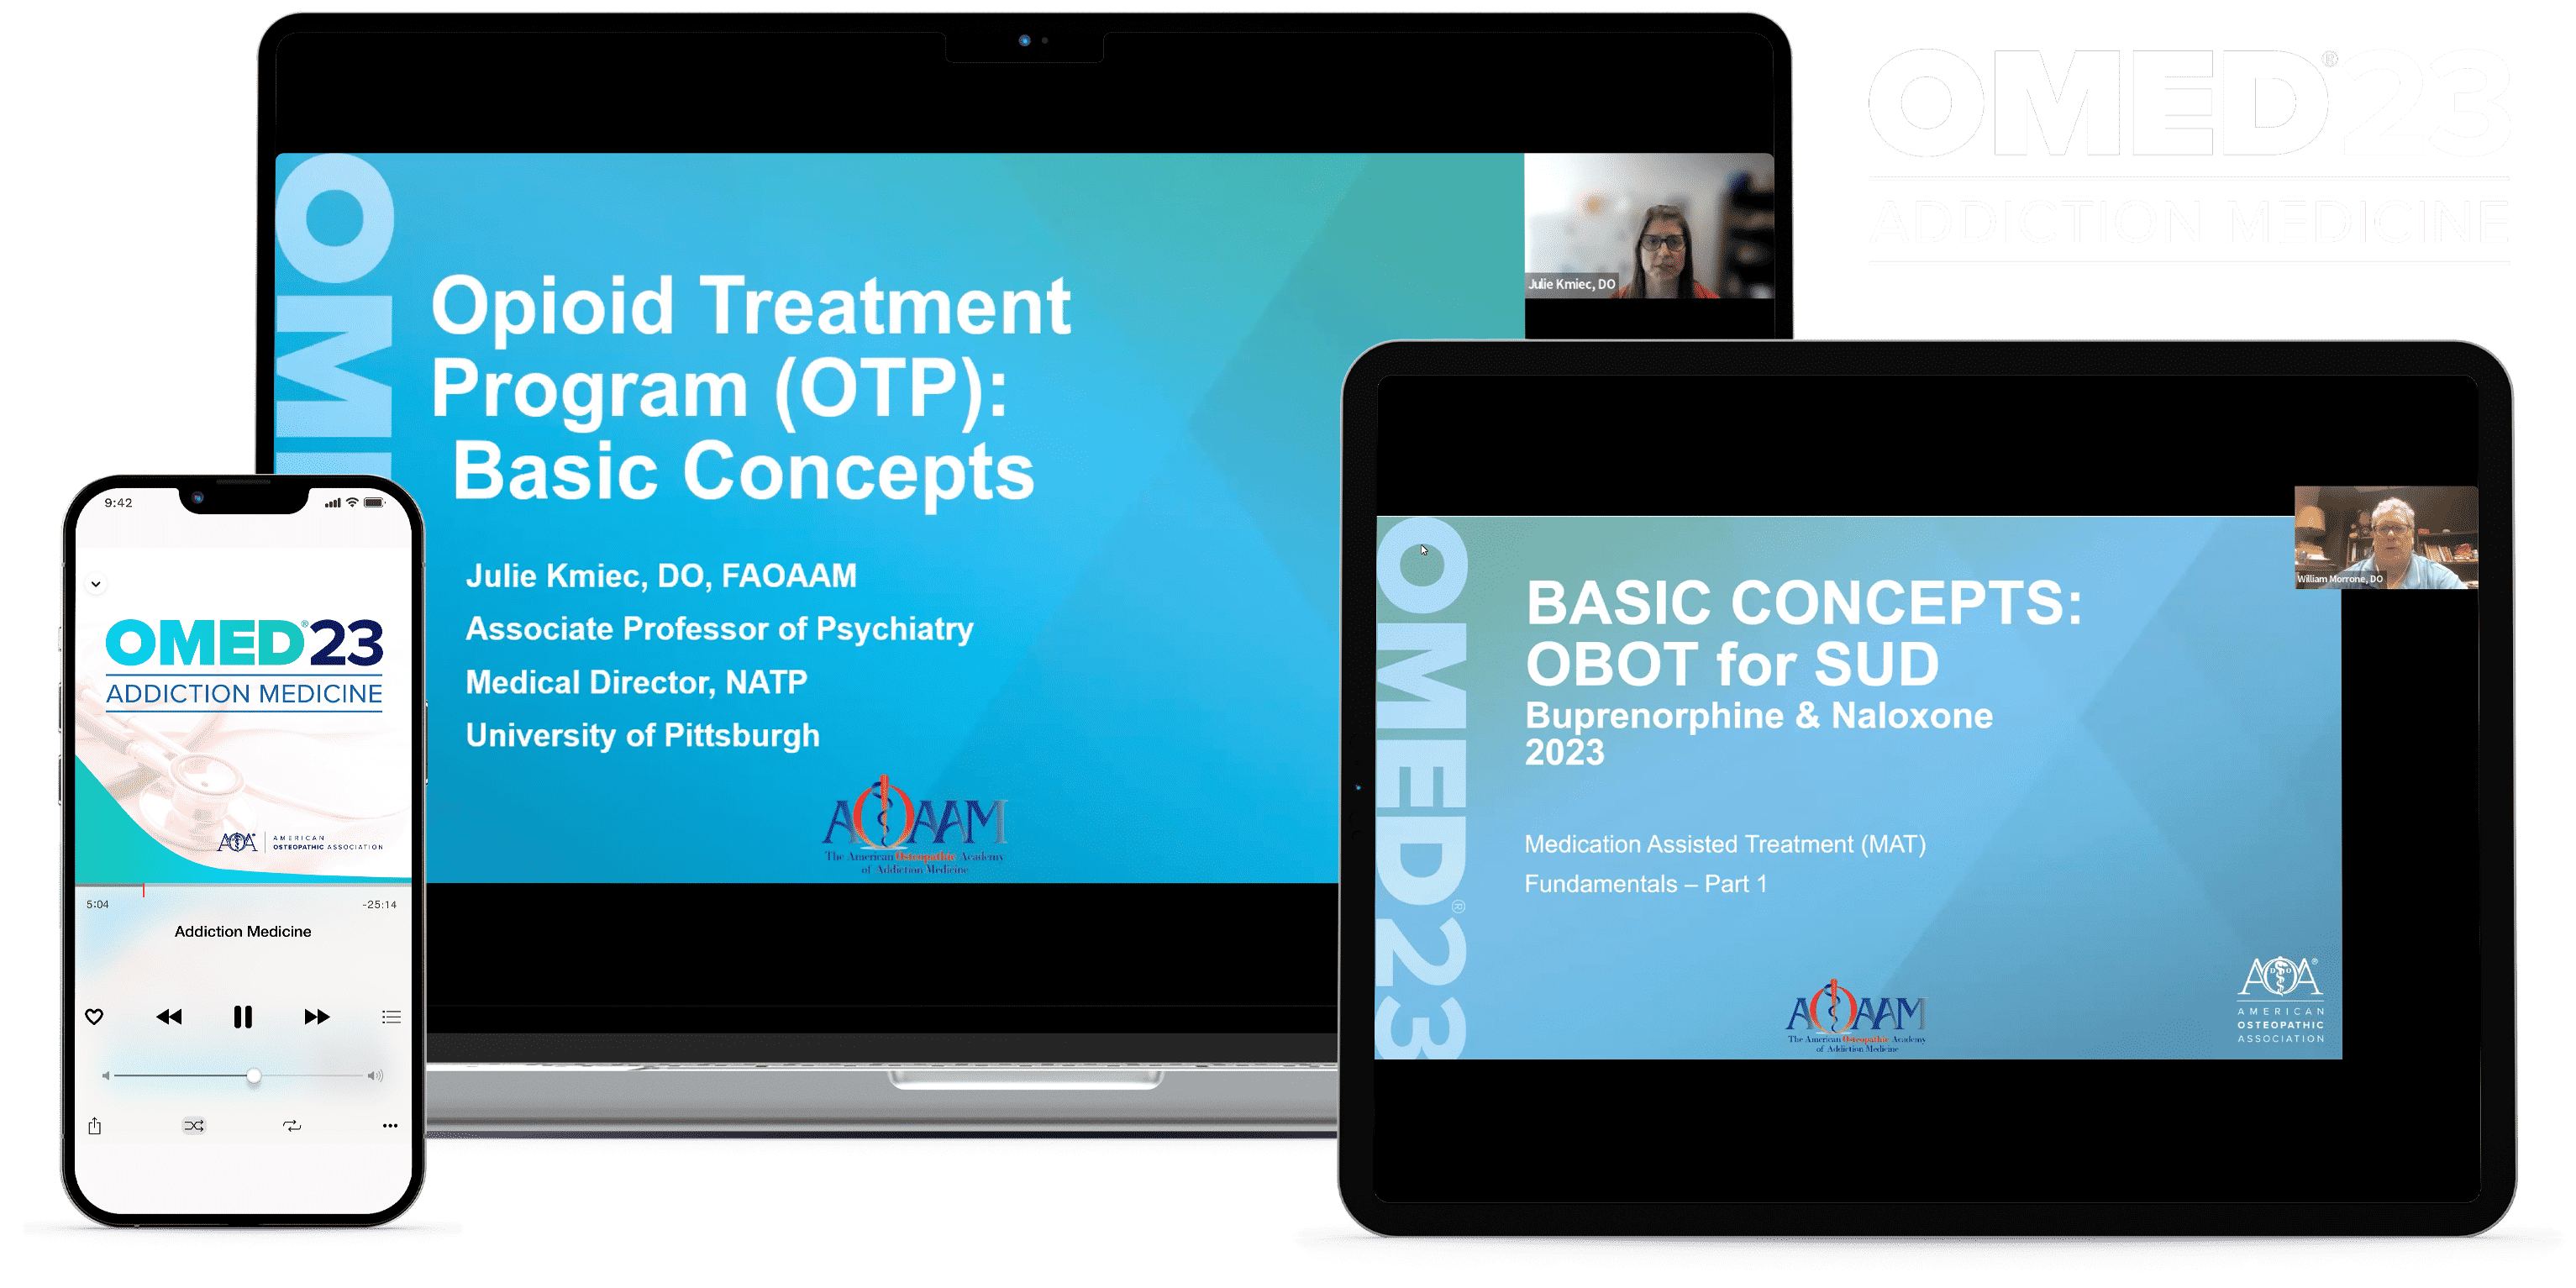 Laptop, tablet, and phone with OMED 2023 - Addiction Medicine course on screen